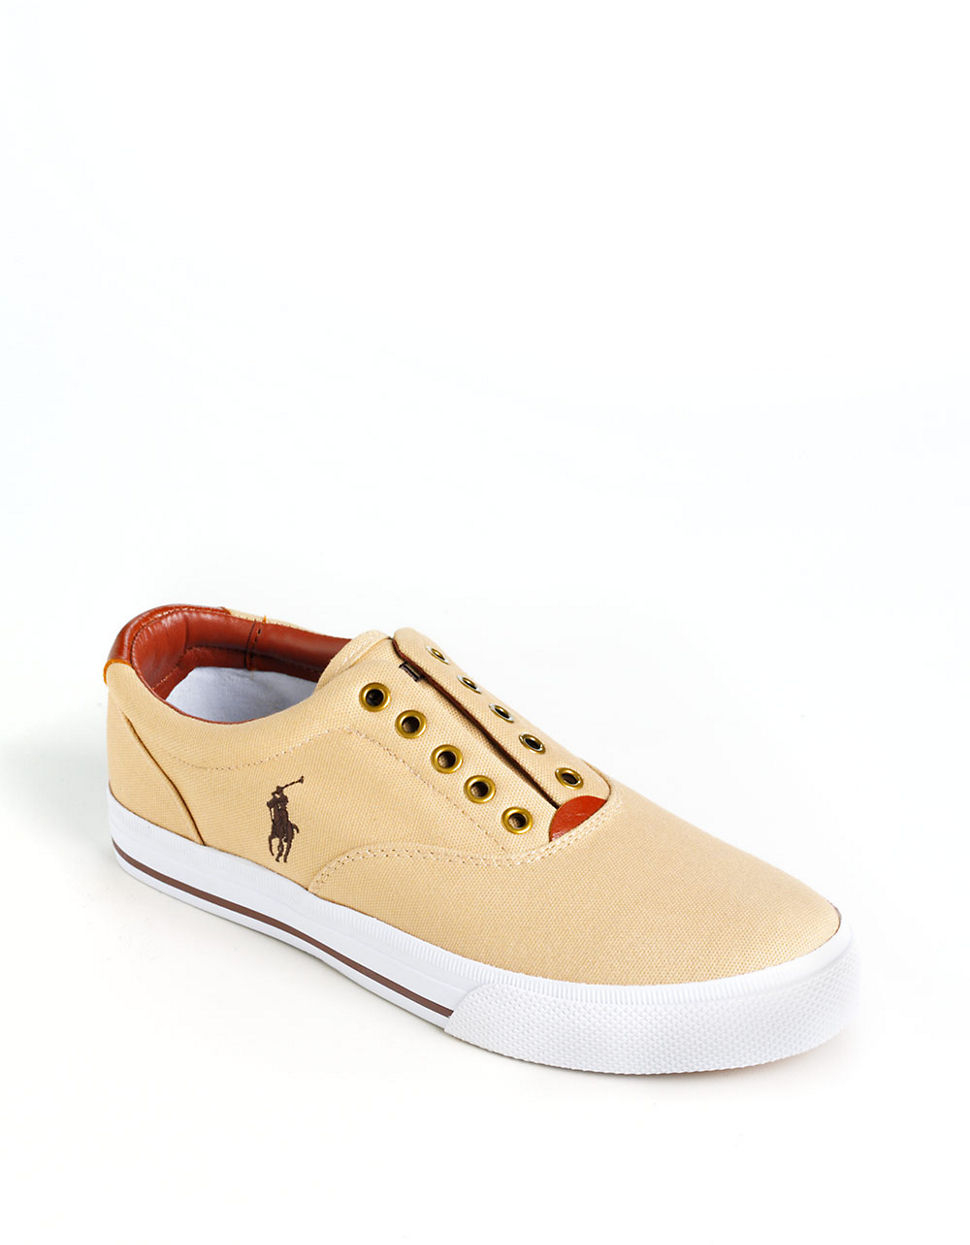 Lyst - Polo ralph lauren Vito Laceless Canvas Sneakers in Natural for Men